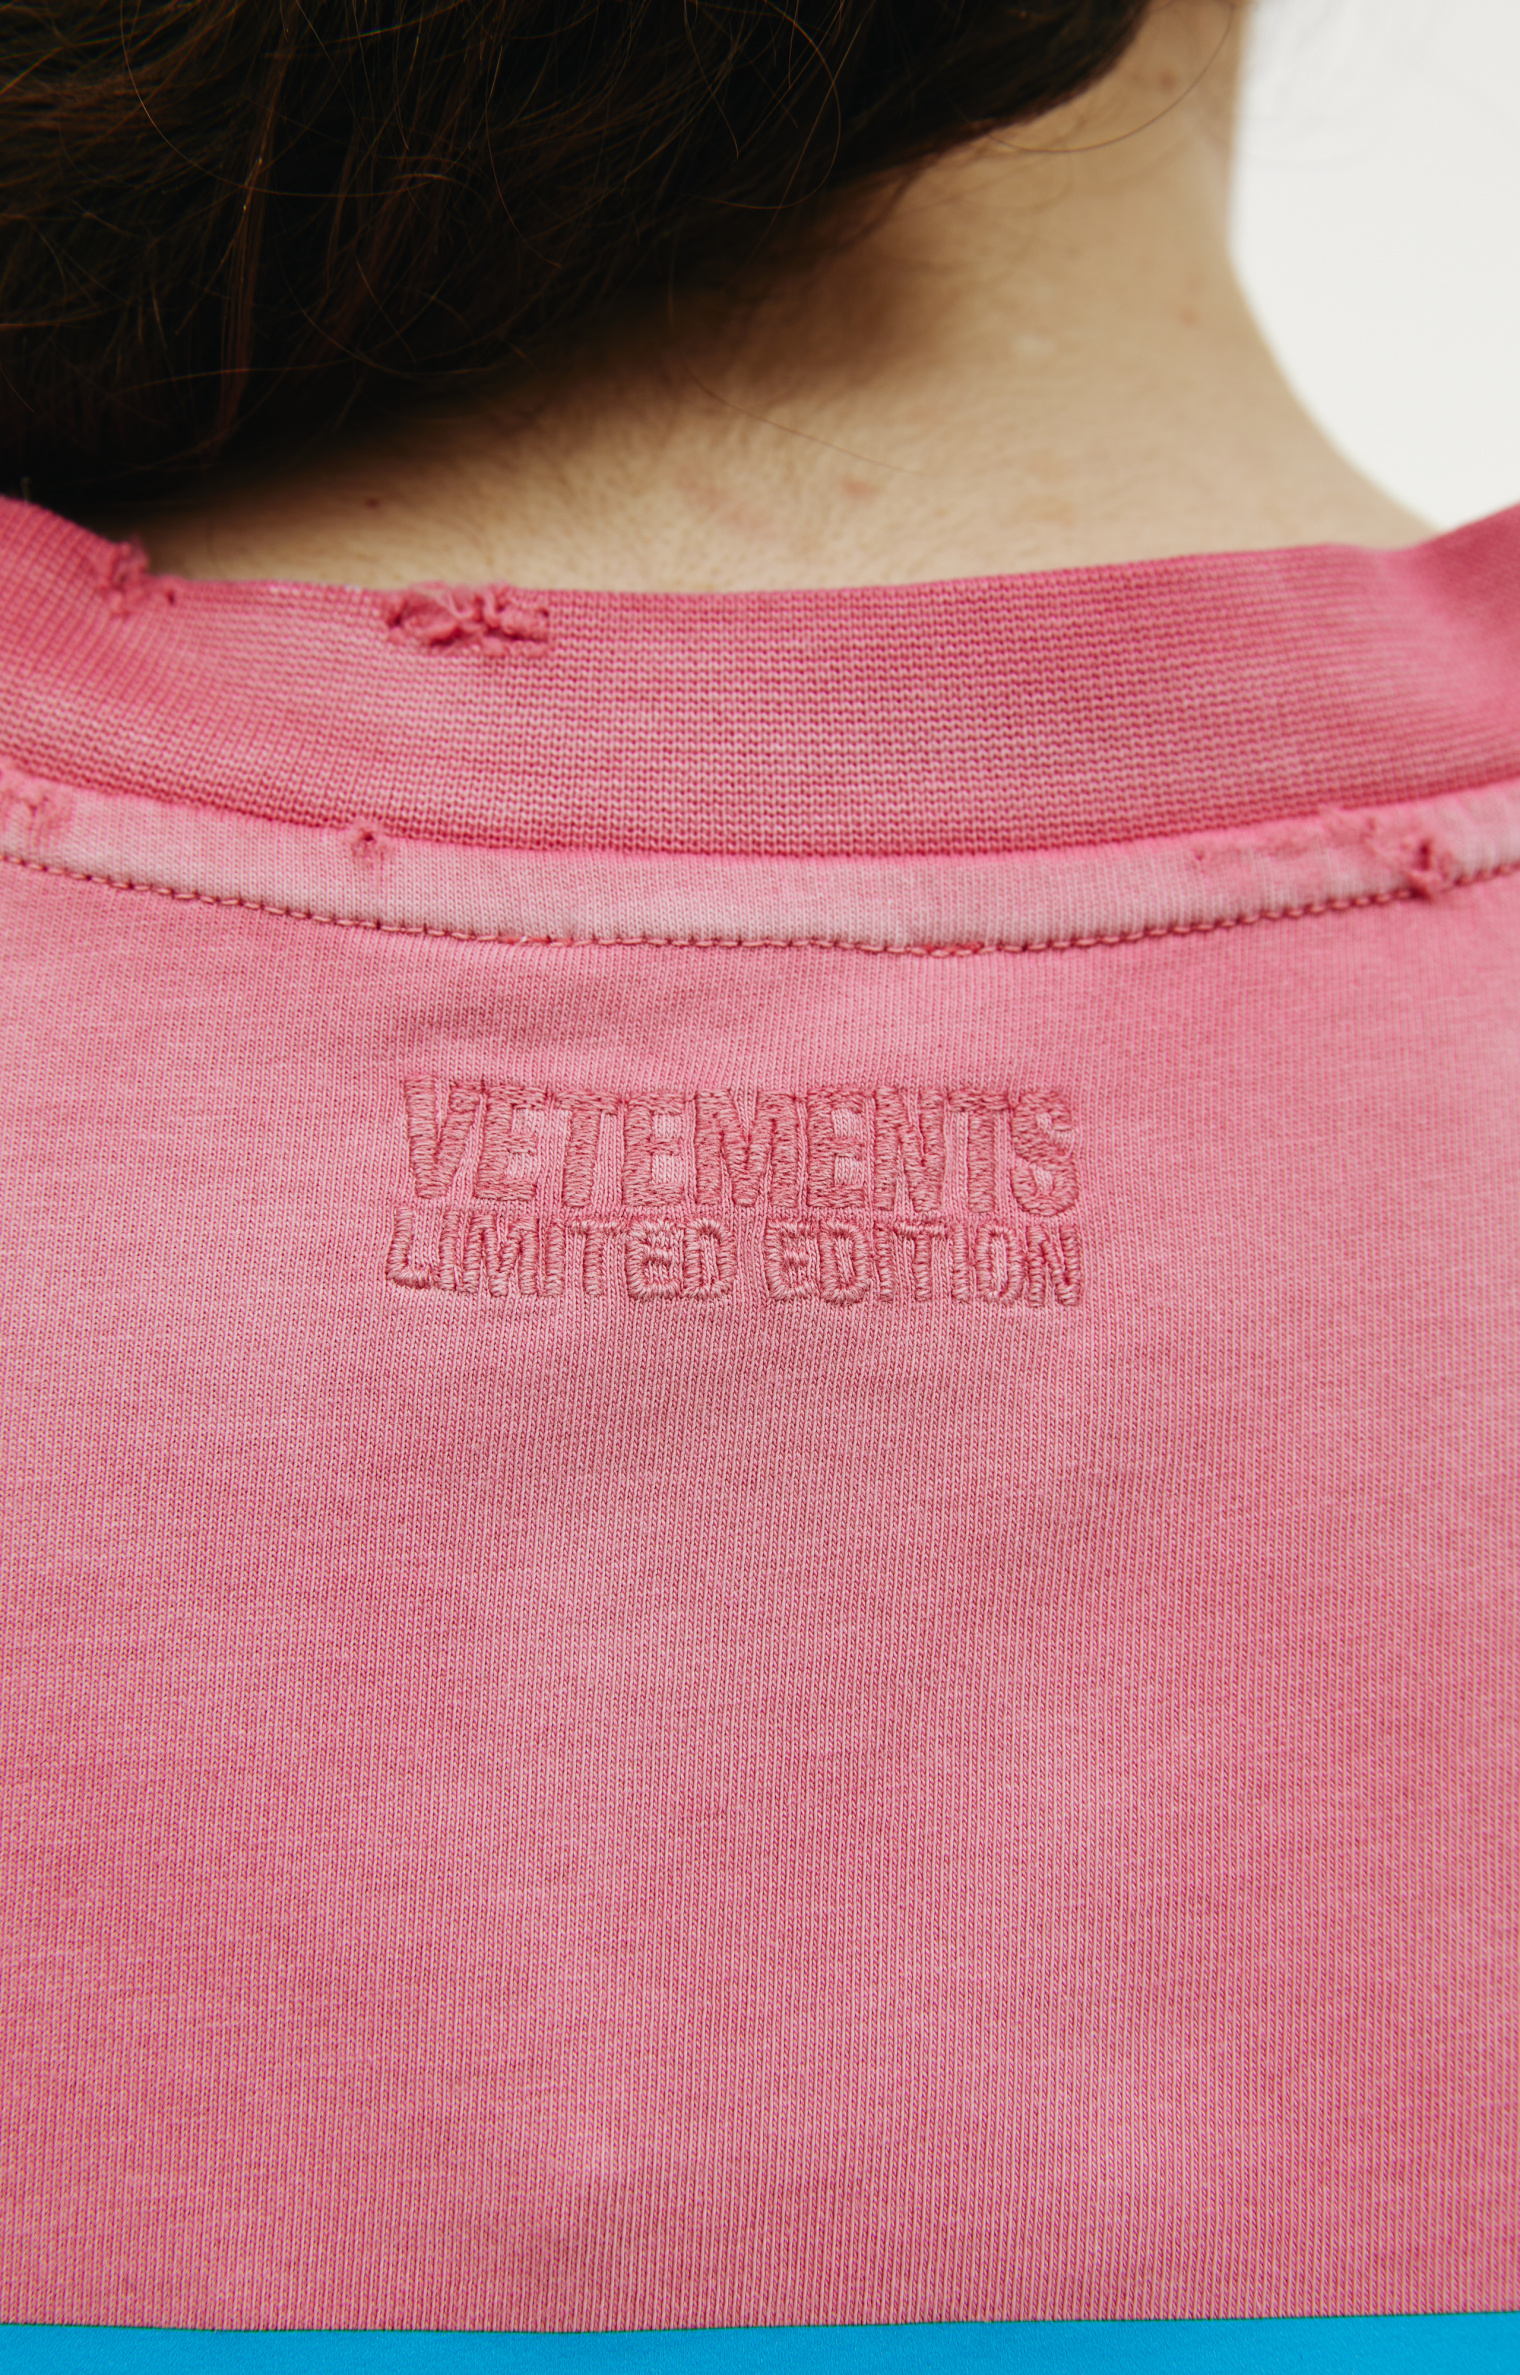 VETEMENTS \'My name is\' printed t-shirt